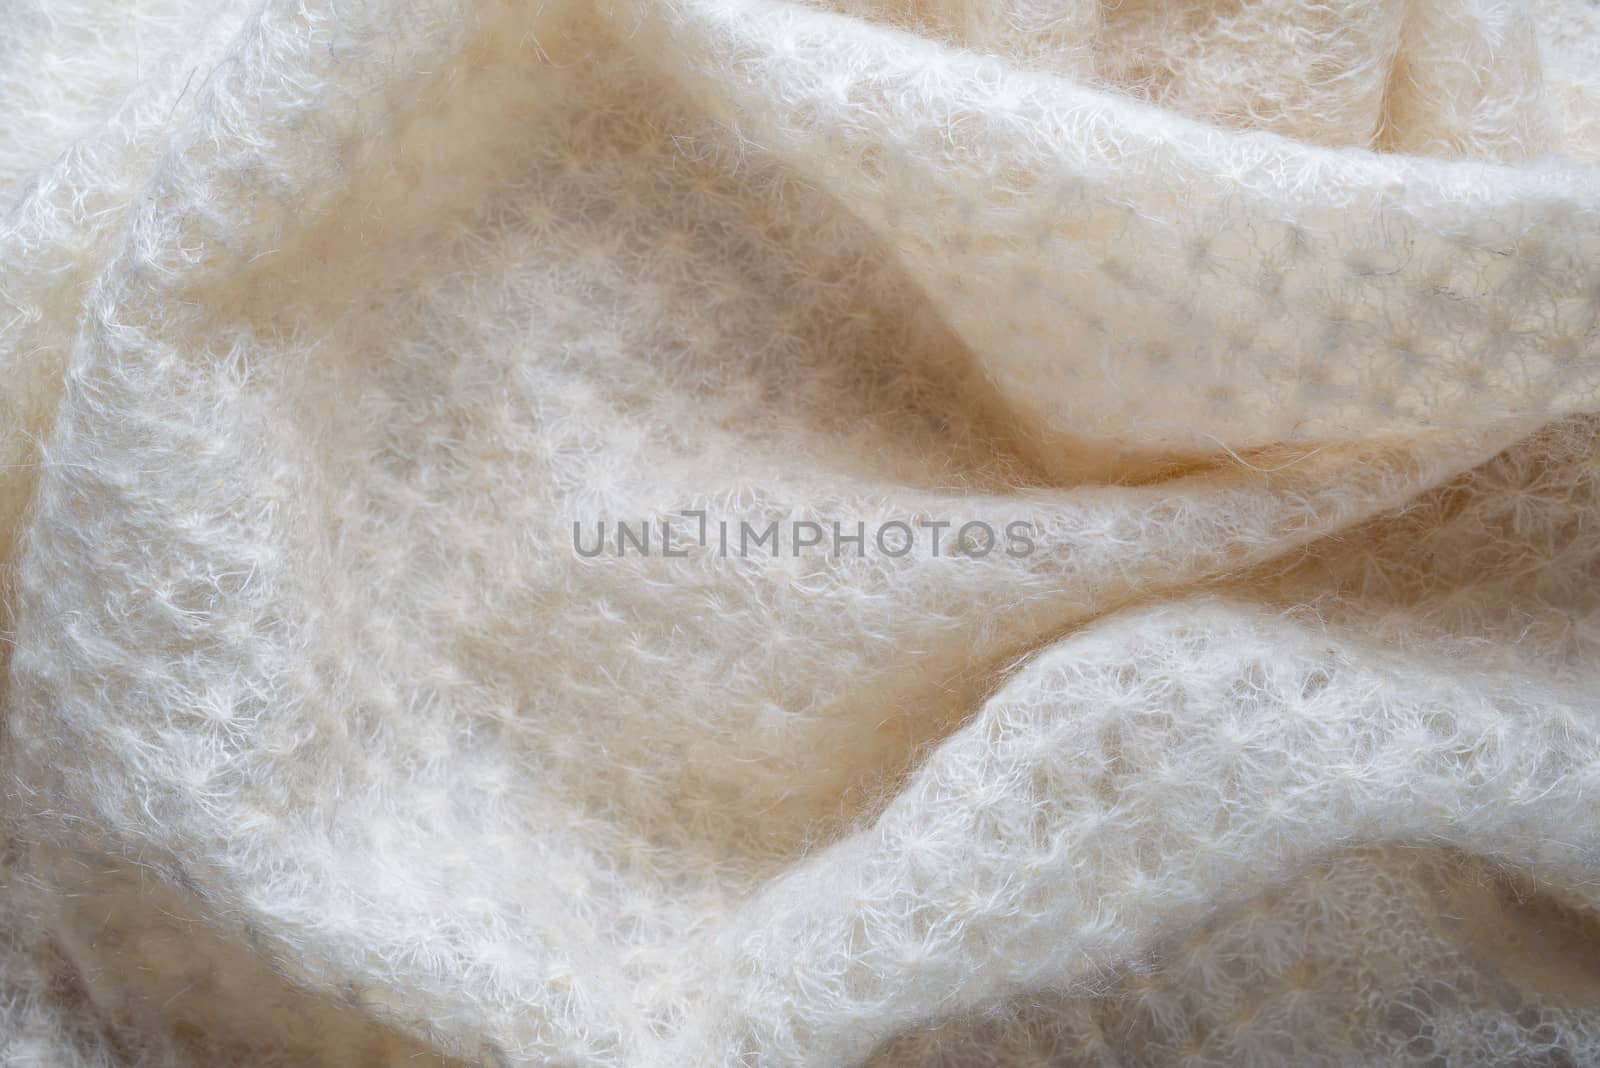 Soft folds of a white goat fluff scarf to be used as background